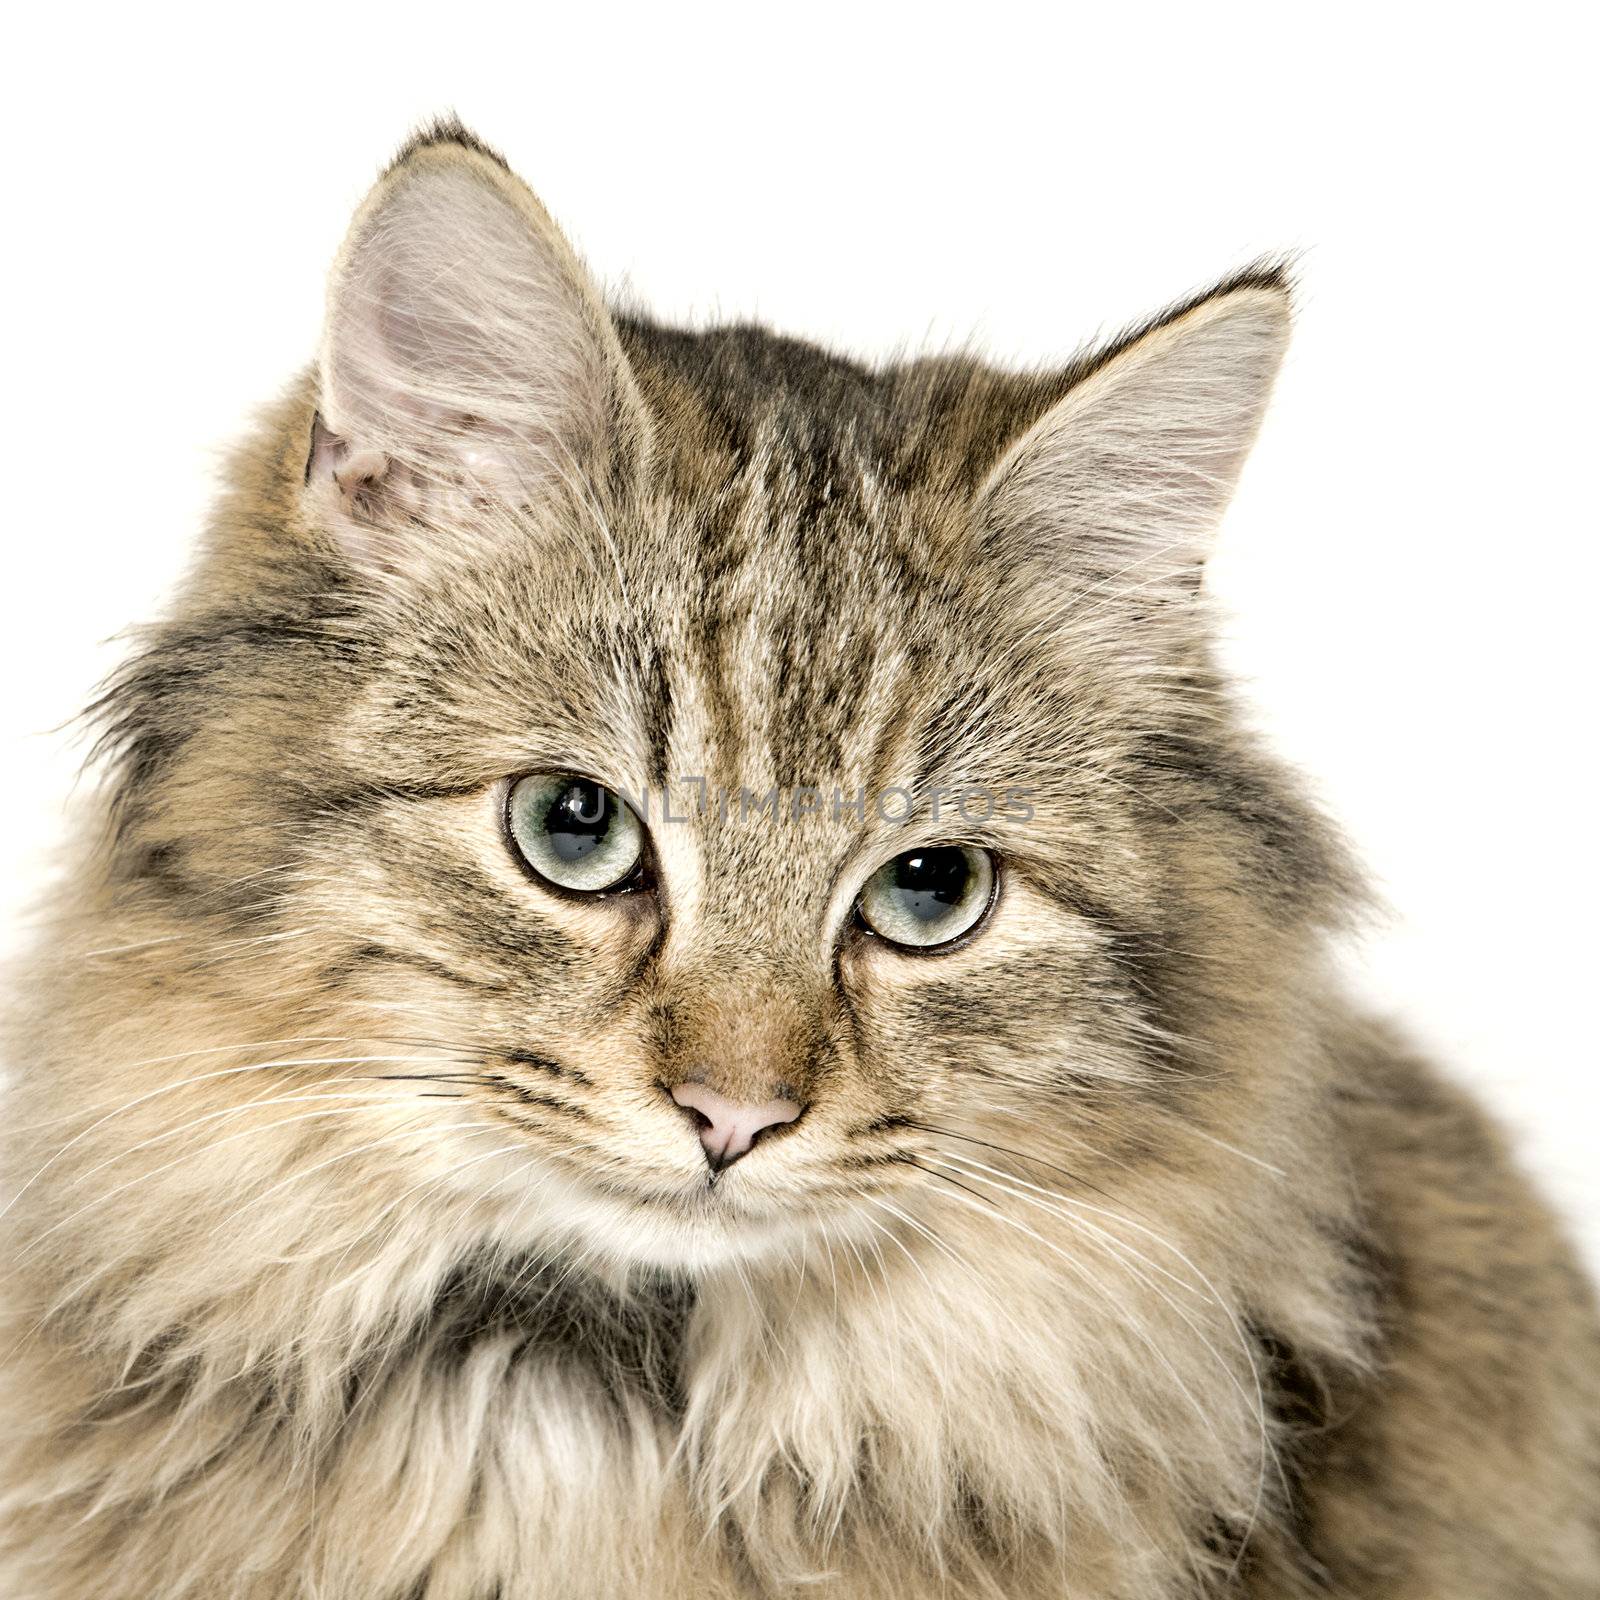 Studio portrait of a cuted mixed breed long haired kitten